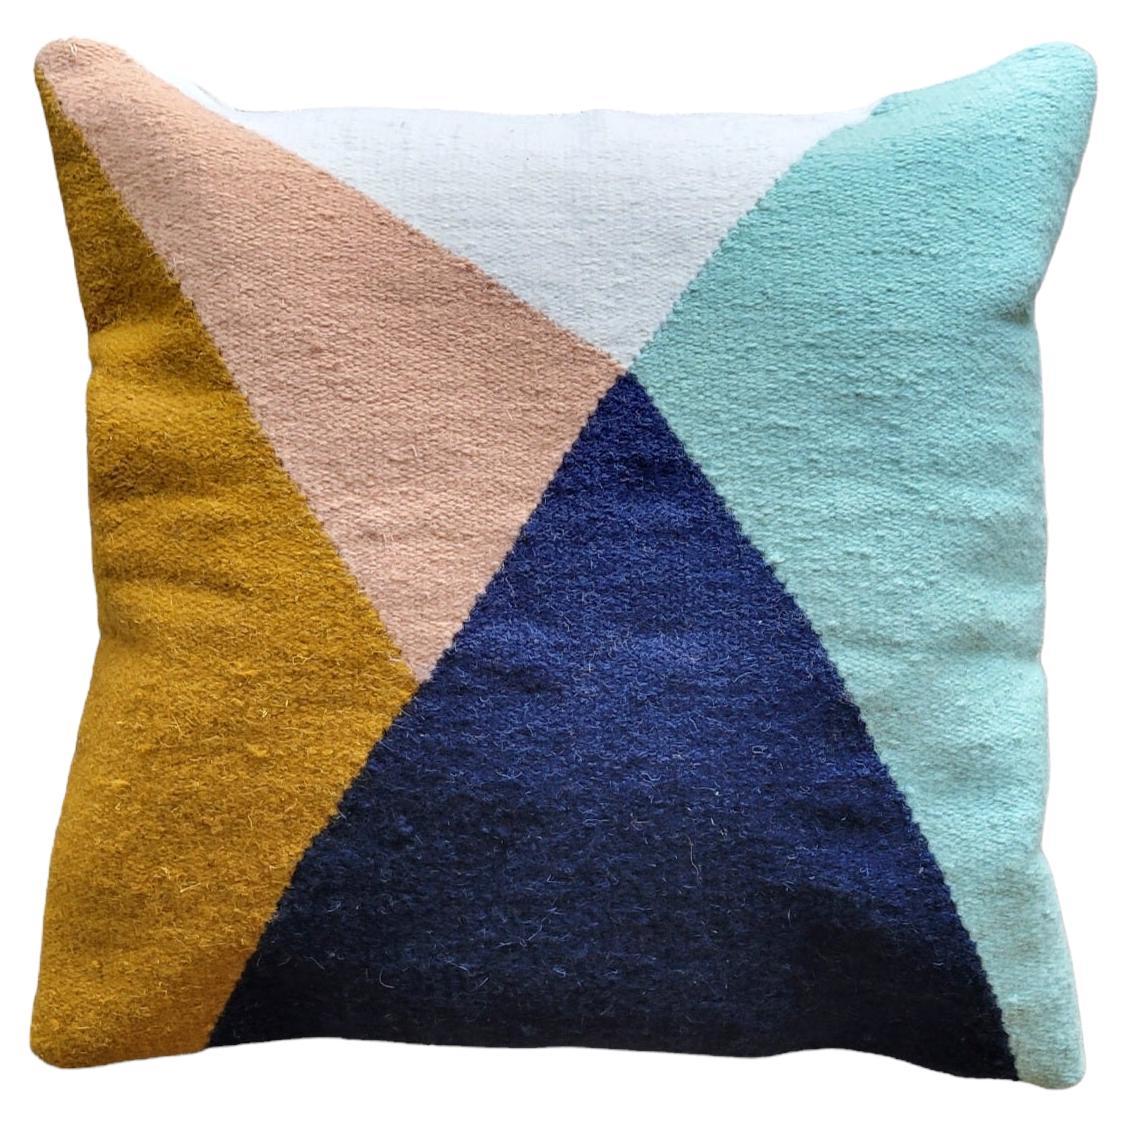 Vera Colorful Handwoven Throw Pillow Cover